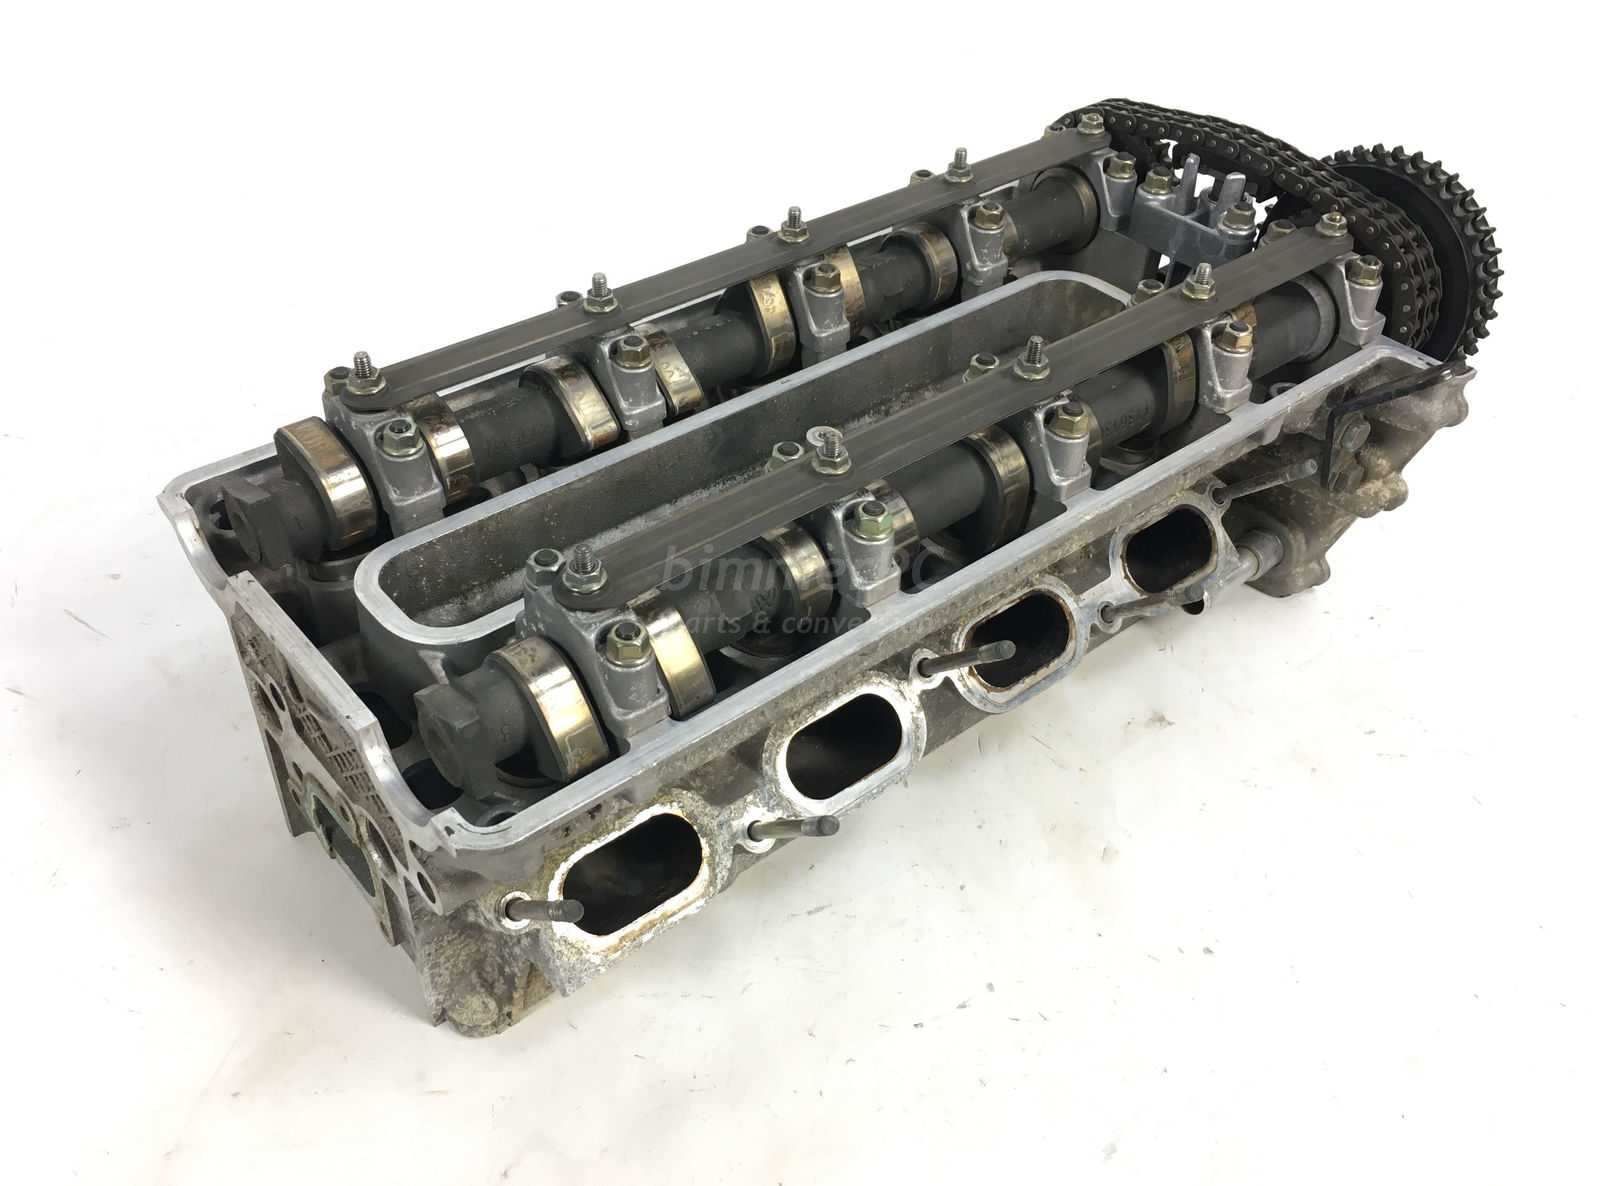 Picture of BMW 11121702685 Left Cylinder Head Bank 2 Cylinders 5-8 M60 B30 3.0L V8 E34 530i Late for sale